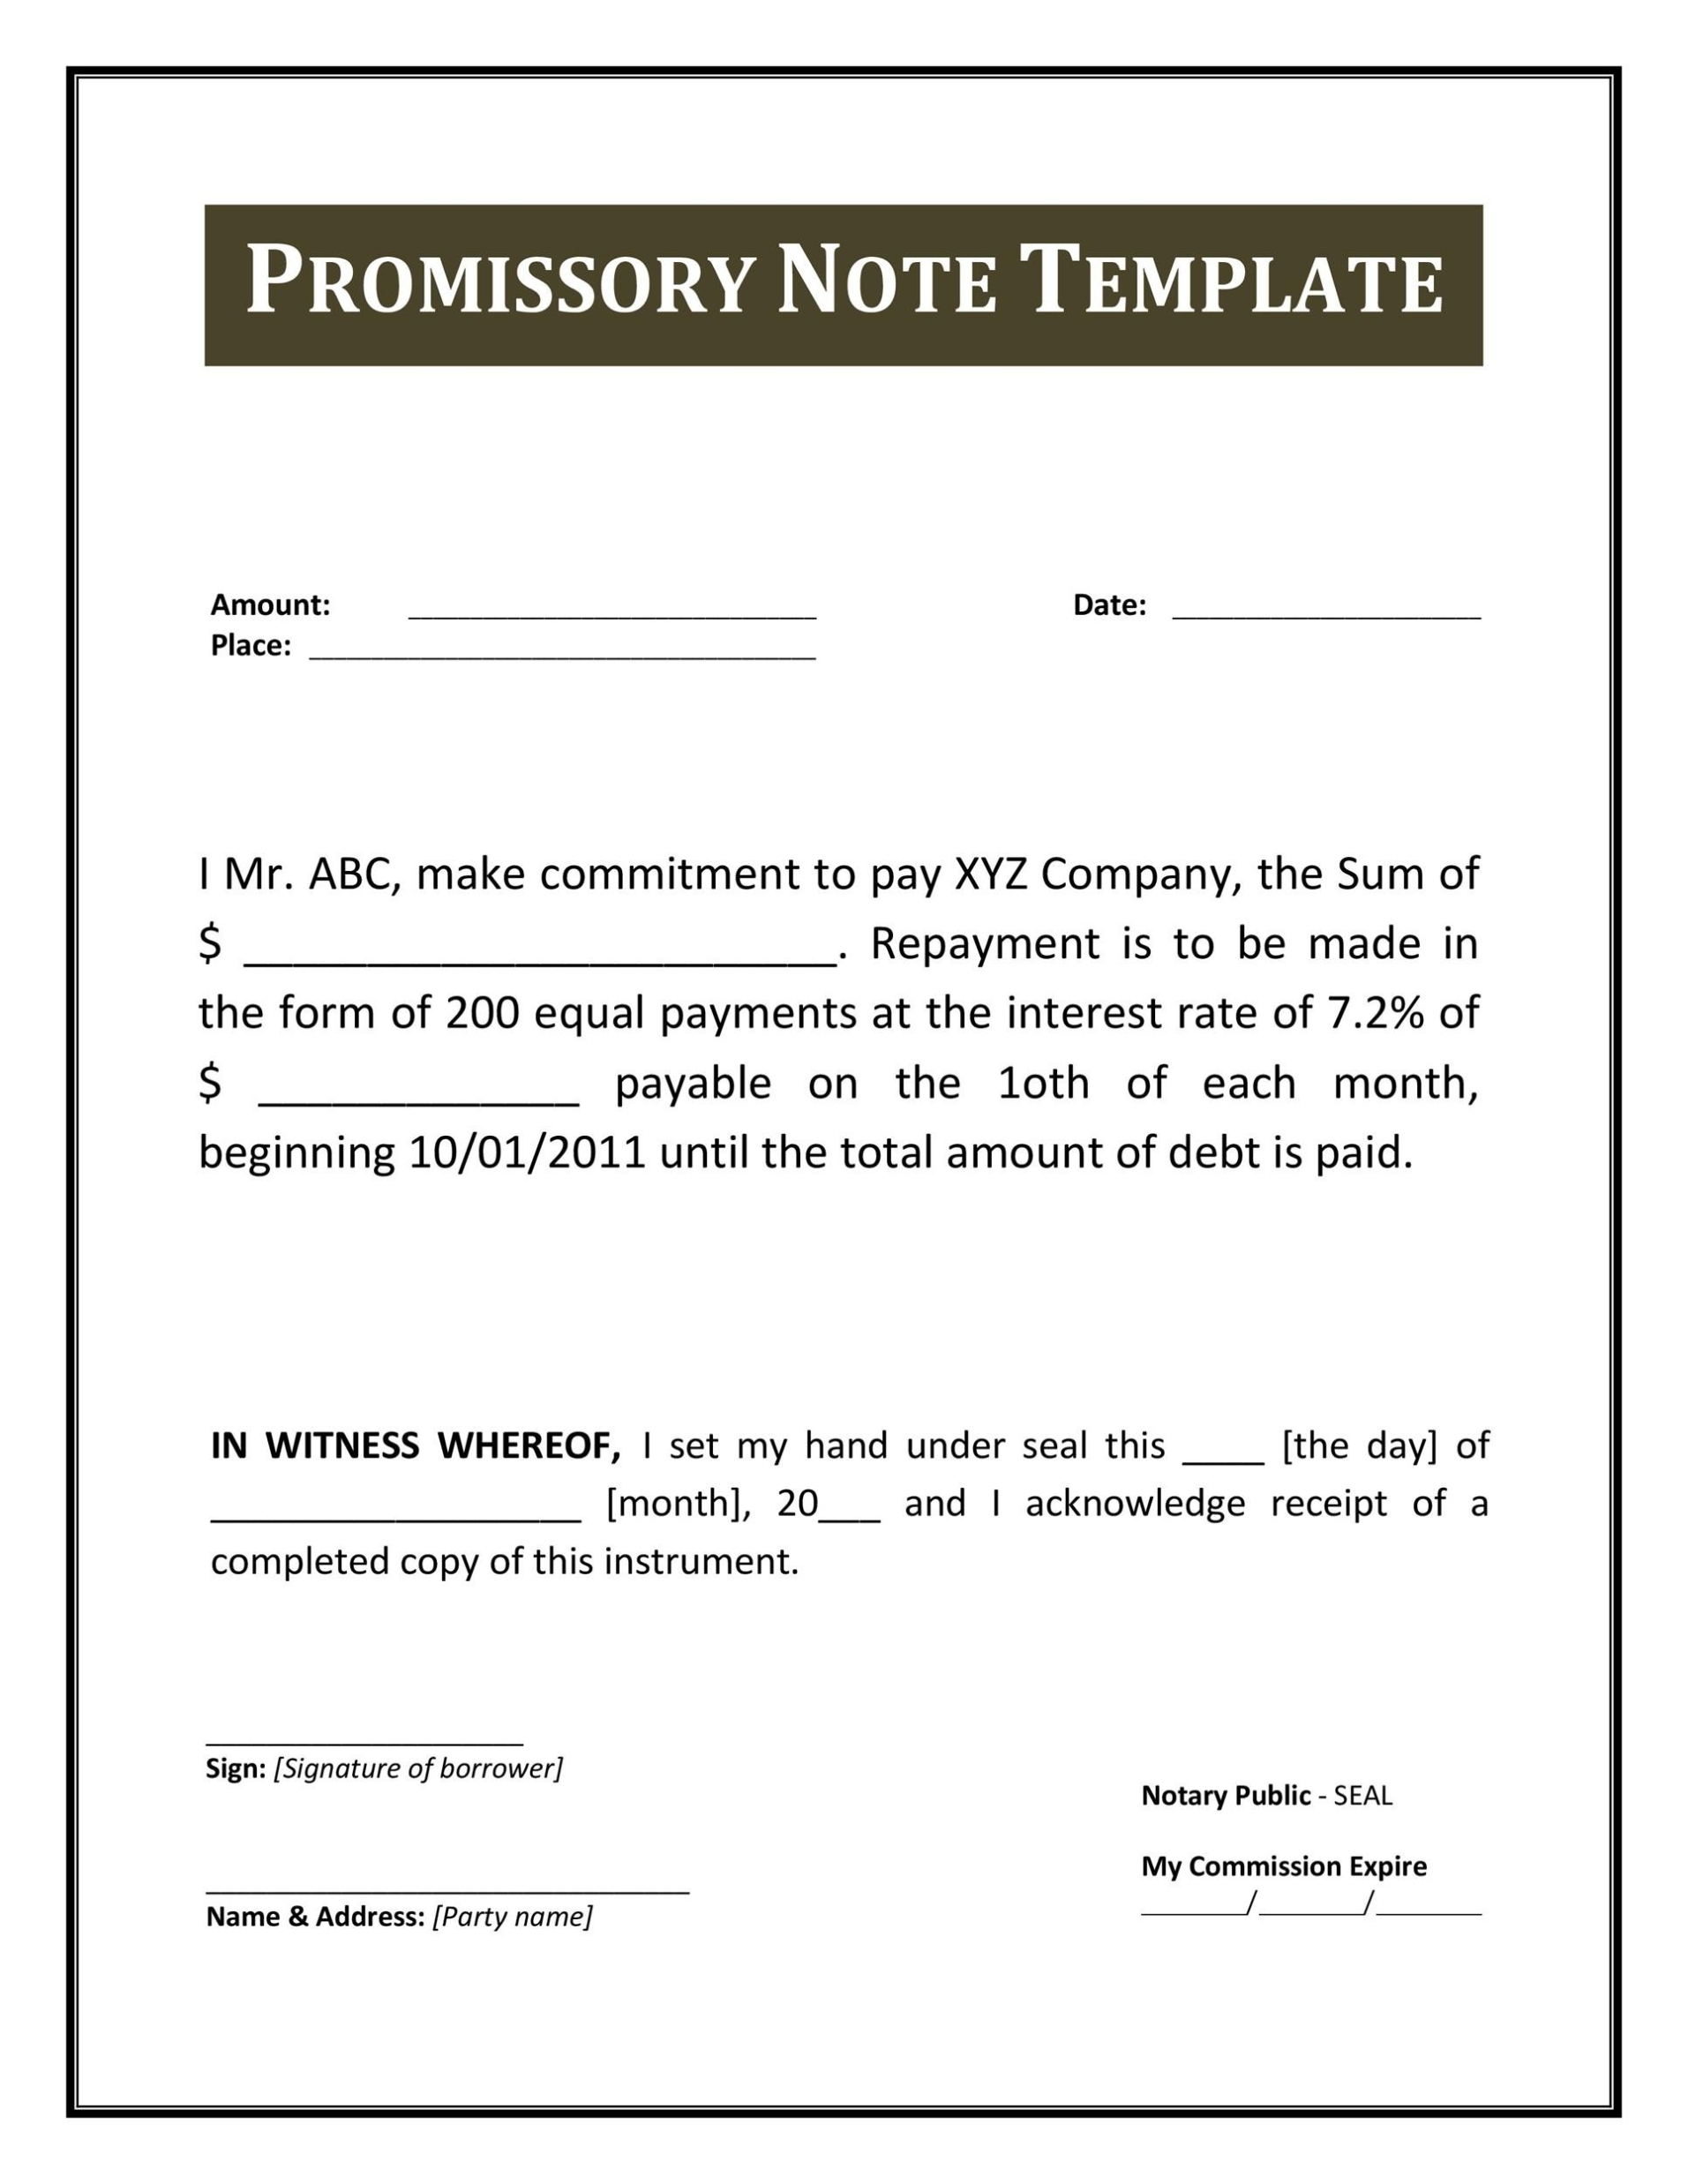 45 Free Promissory Note Templates &amp; Forms [Word &amp; Pdf] ᐅ Templatelab pertaining to Auto Promissory Note Template